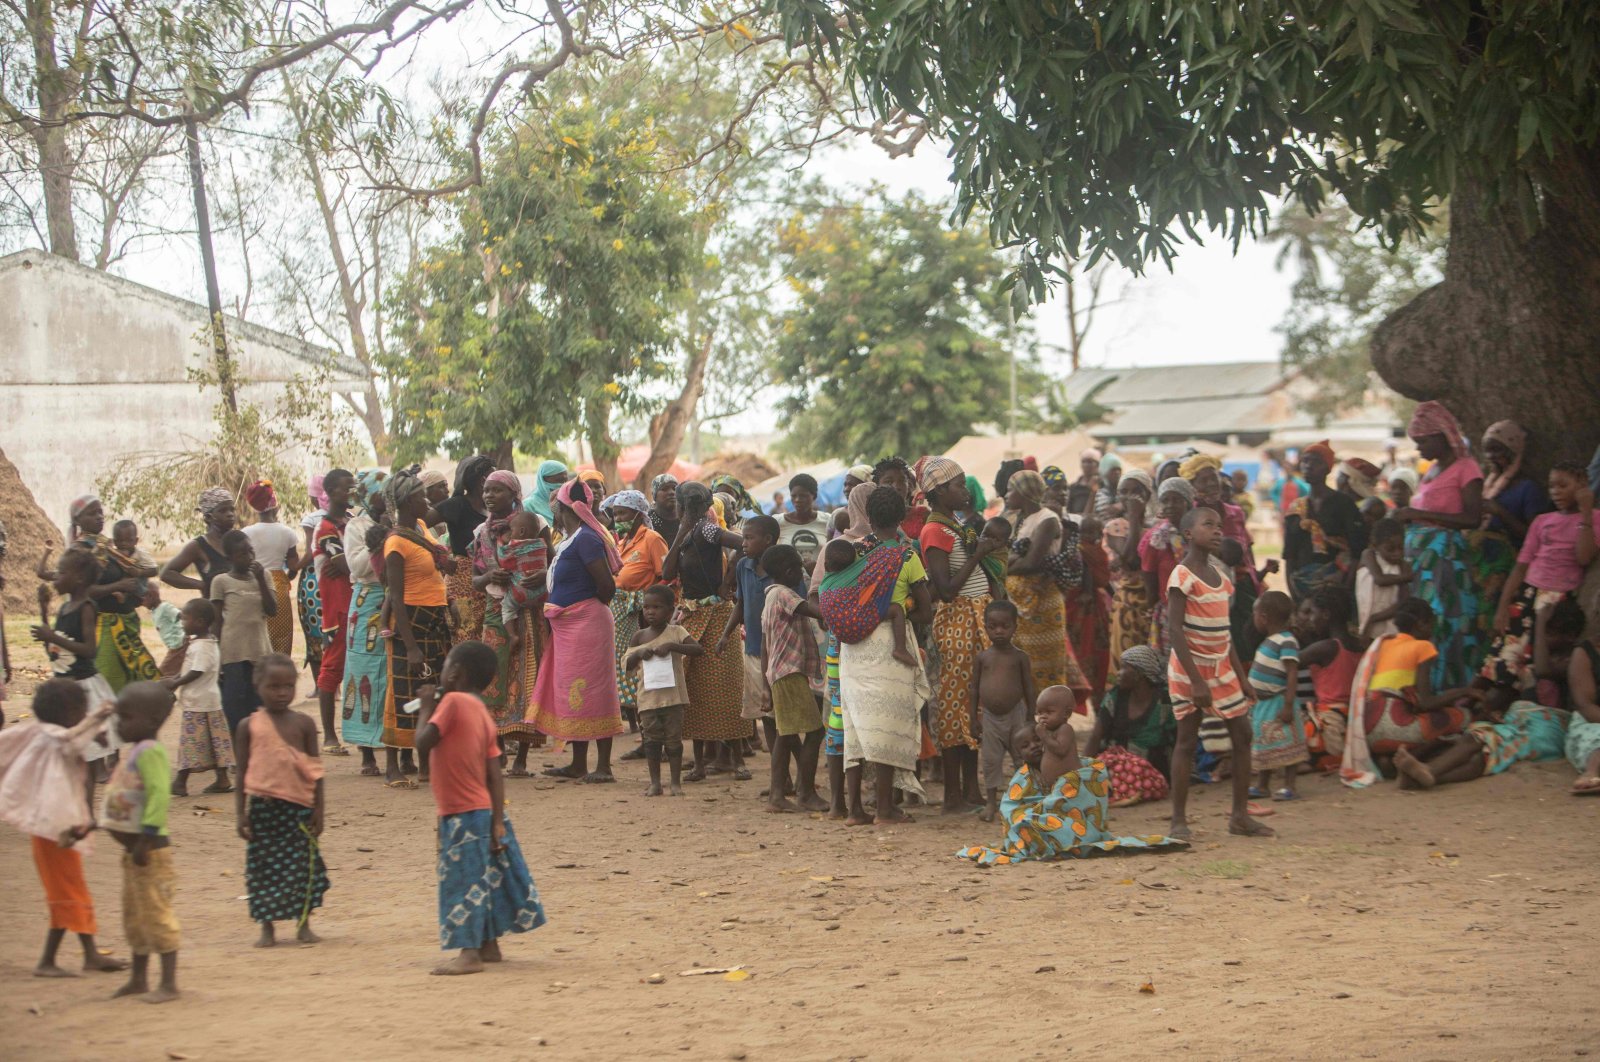 Displaced women meet at the Centro Agrrio de Napala where hundreds of displaced are sheltered after fleeing attacks by armed insurgents in different areas of the province of Cabo Delgado, in northern Mozambique, on Dec. 11, 2020. (AFP Photo)